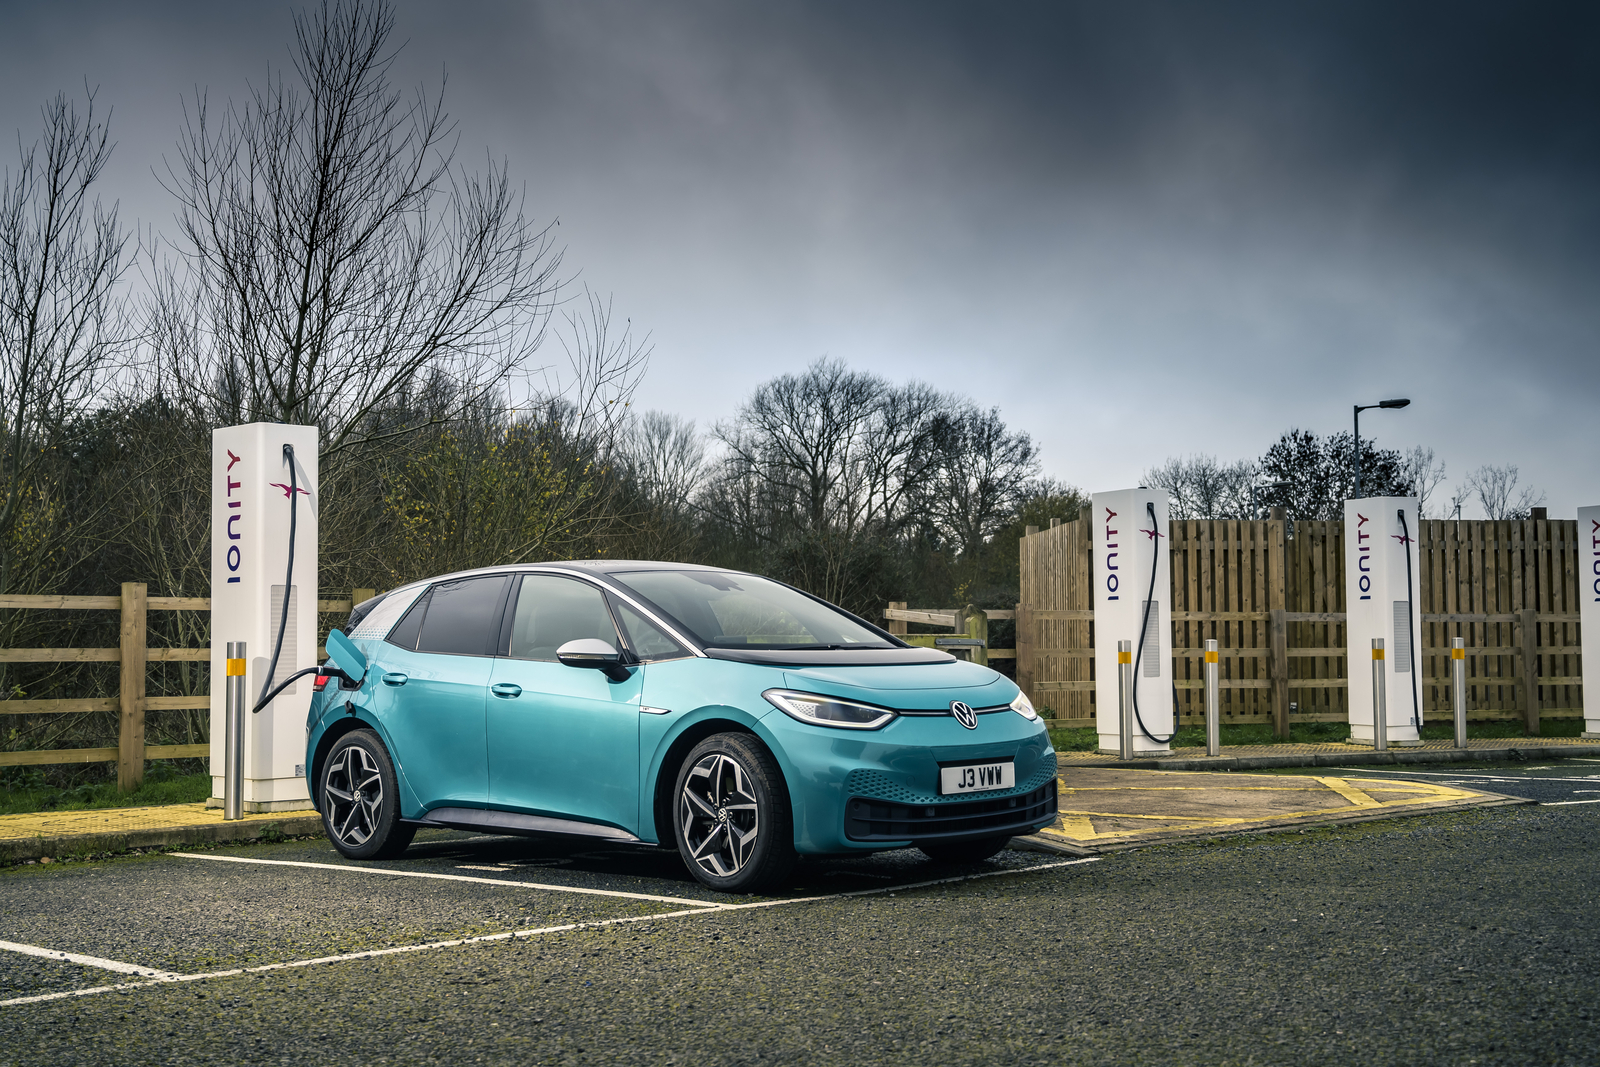 UK government to invest £20 million in local EV chargers